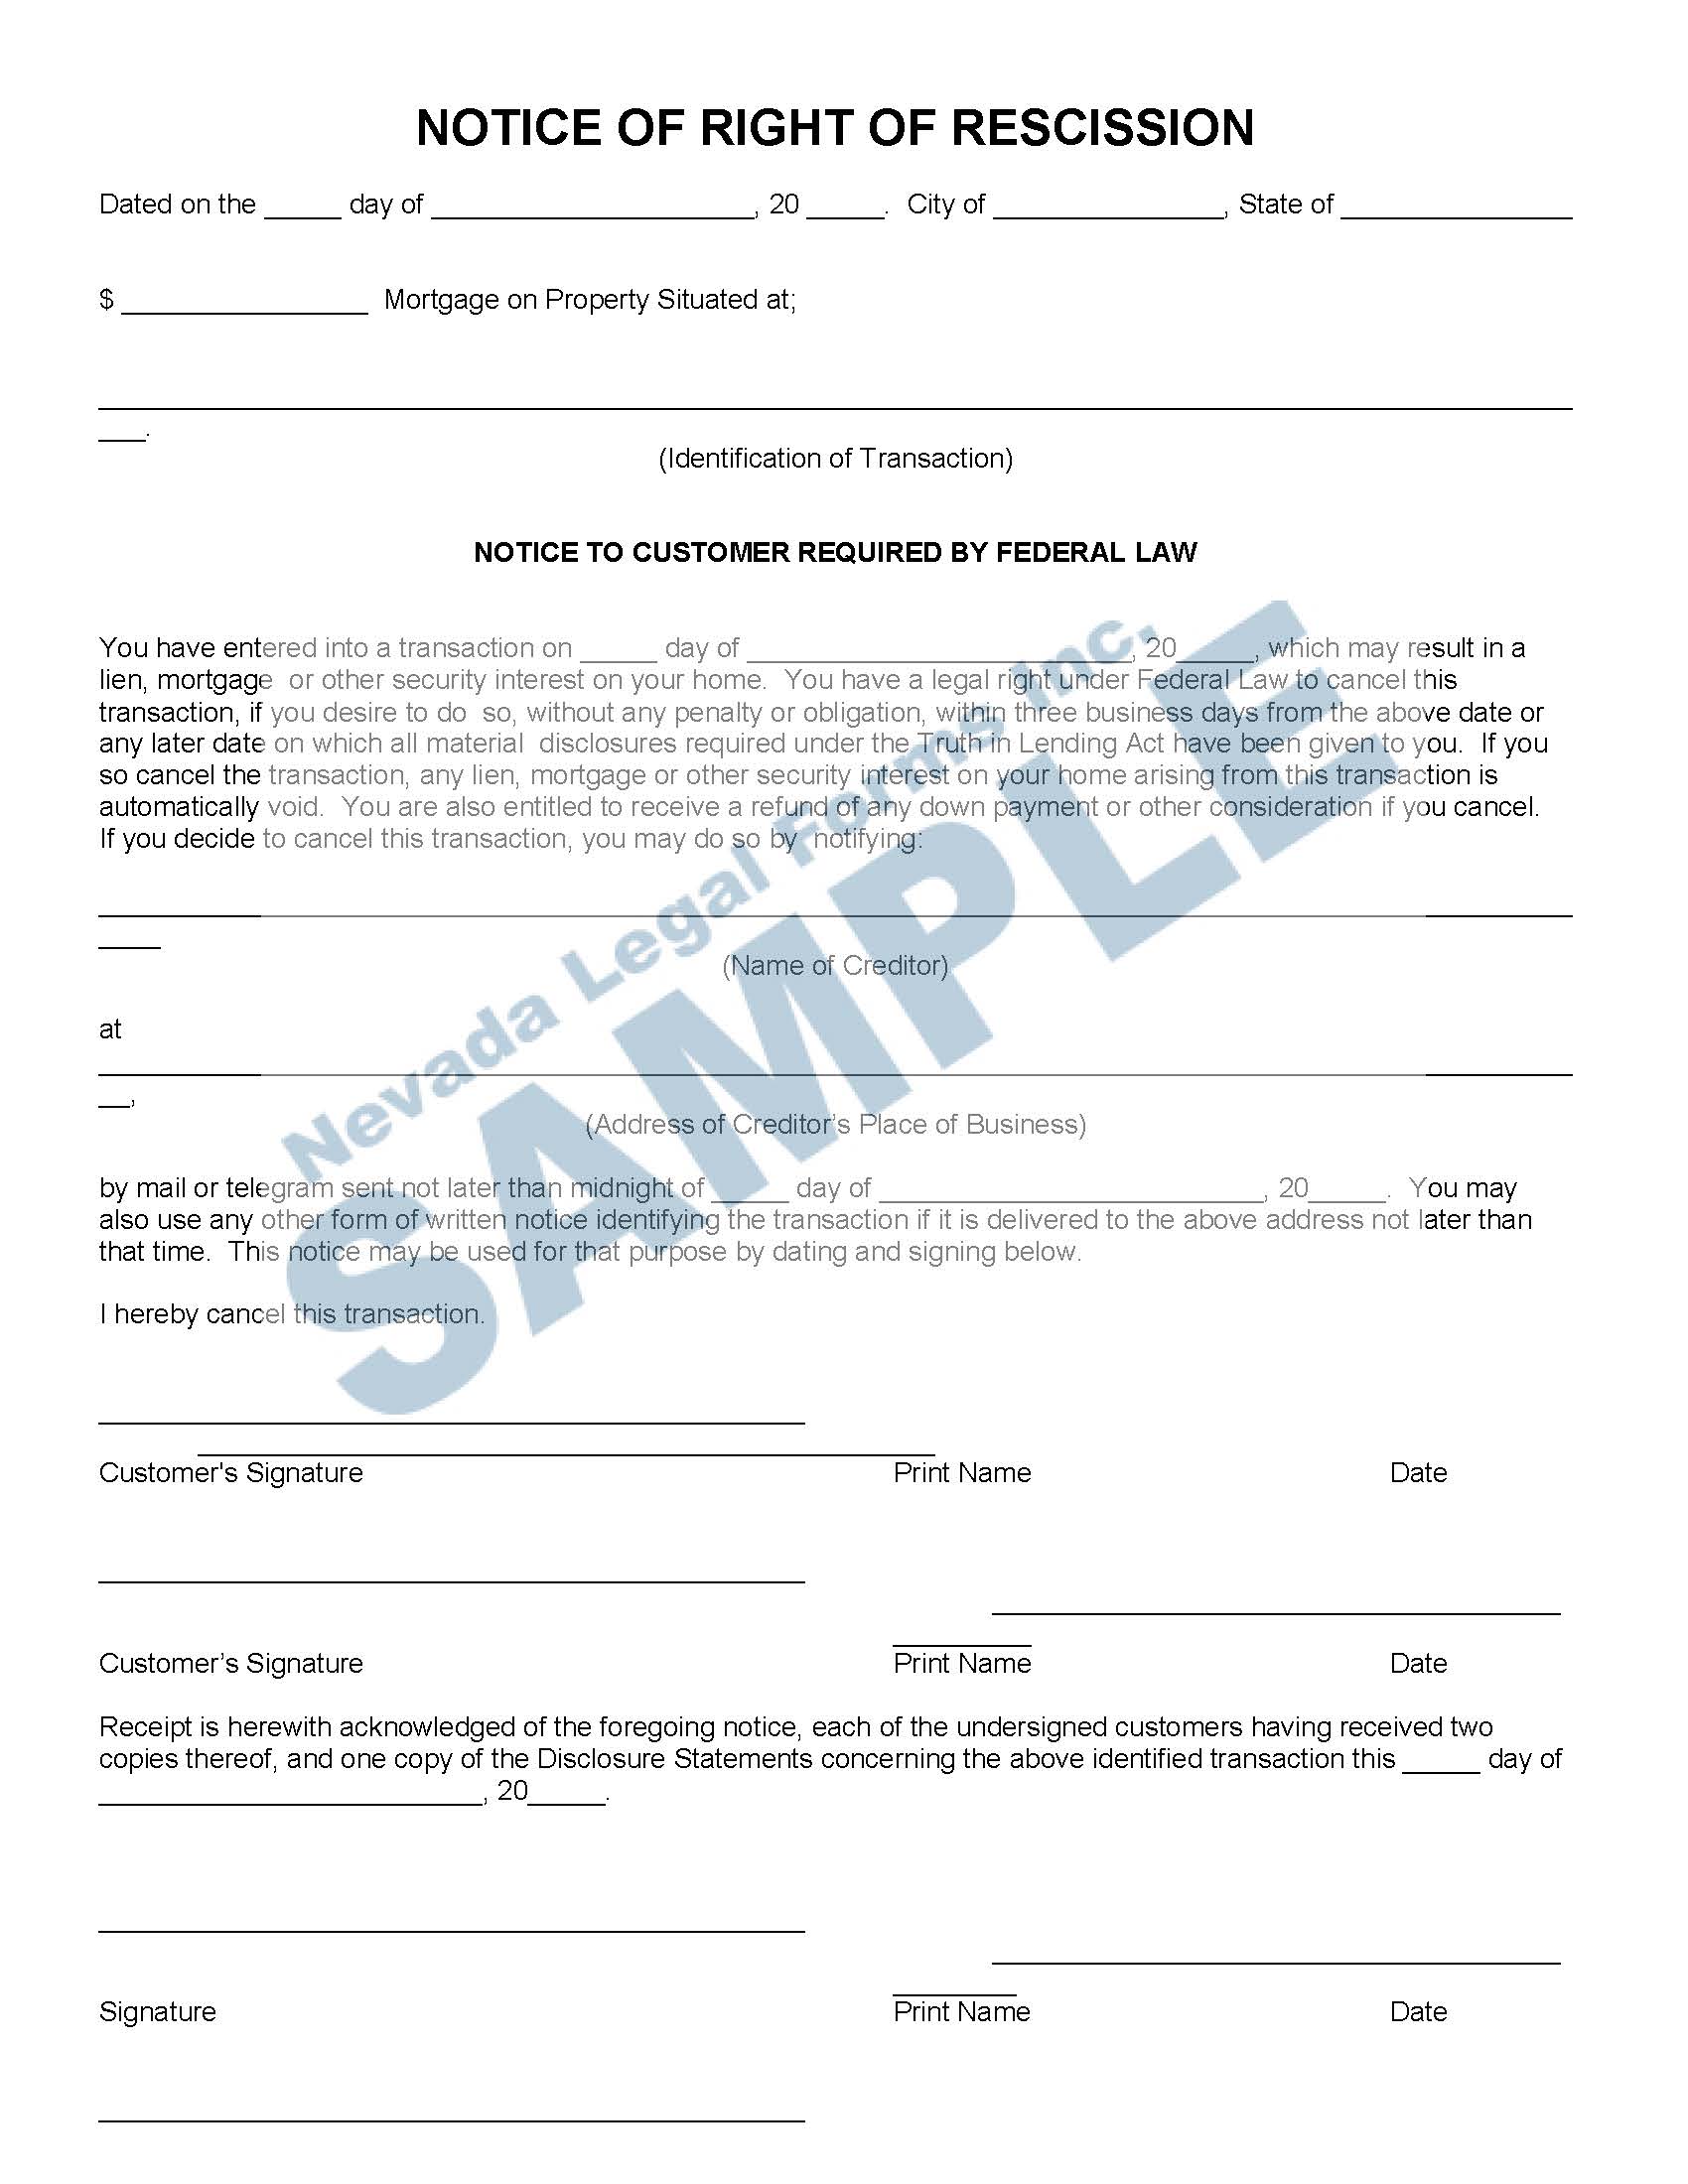 NOTICE OF RIGHT OF RESCISSION Nevada Legal Forms Services